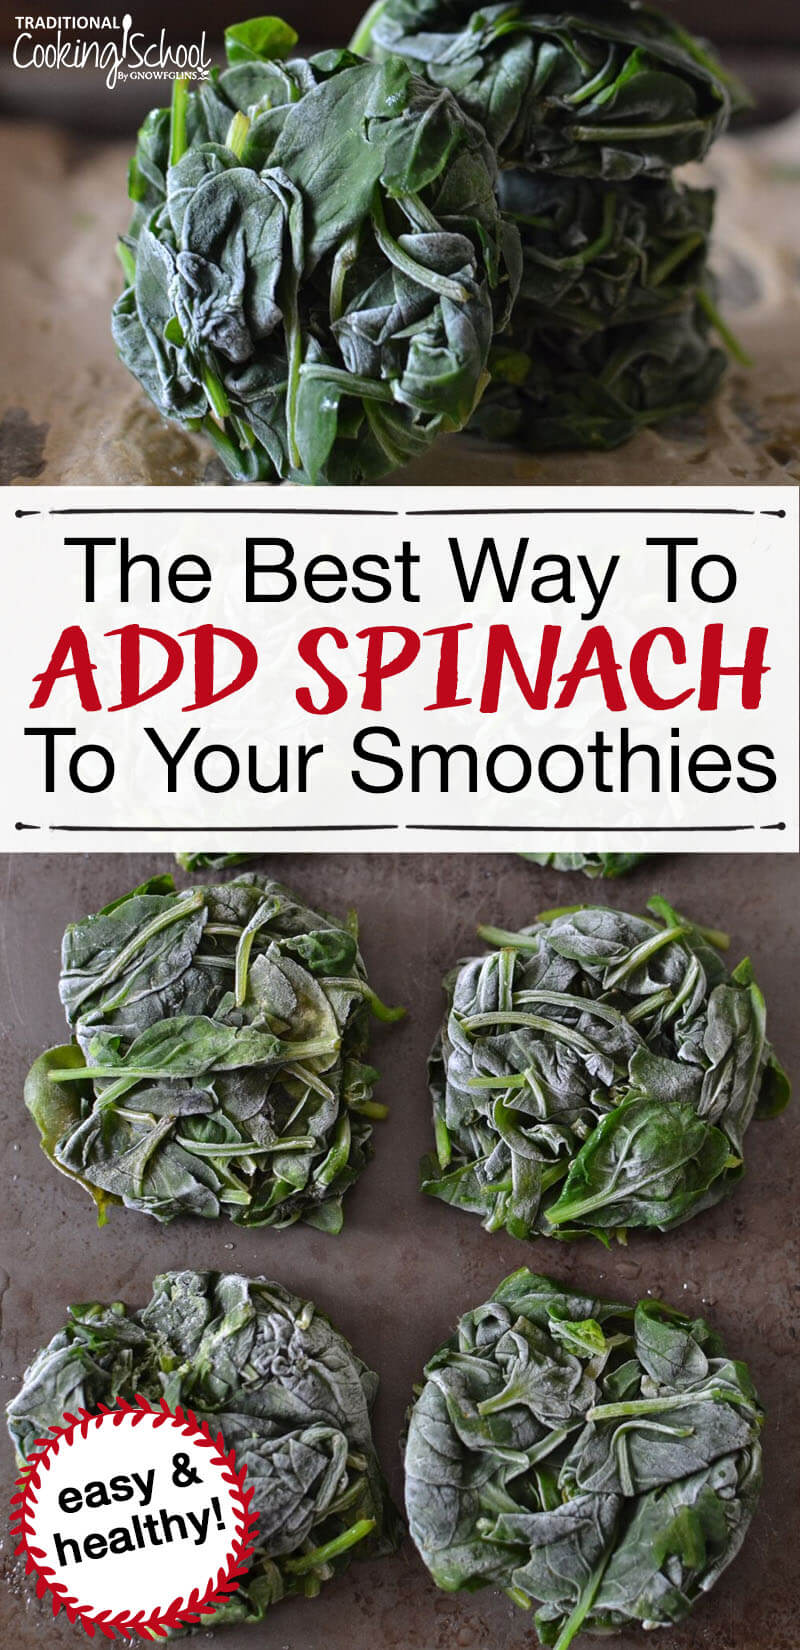 Spinach and kale are power-packed veggies that I love adding to regular and green smoothie recipes for kids and even for weight loss. There's just one problem: they have lots of oxalates. Here's how to lower oxalates and use greens in smoothies without the pain of steaming it every time. Whether you’re adding it to strawberry, pineapple, banana or other fruit, this tip will save time and energy.